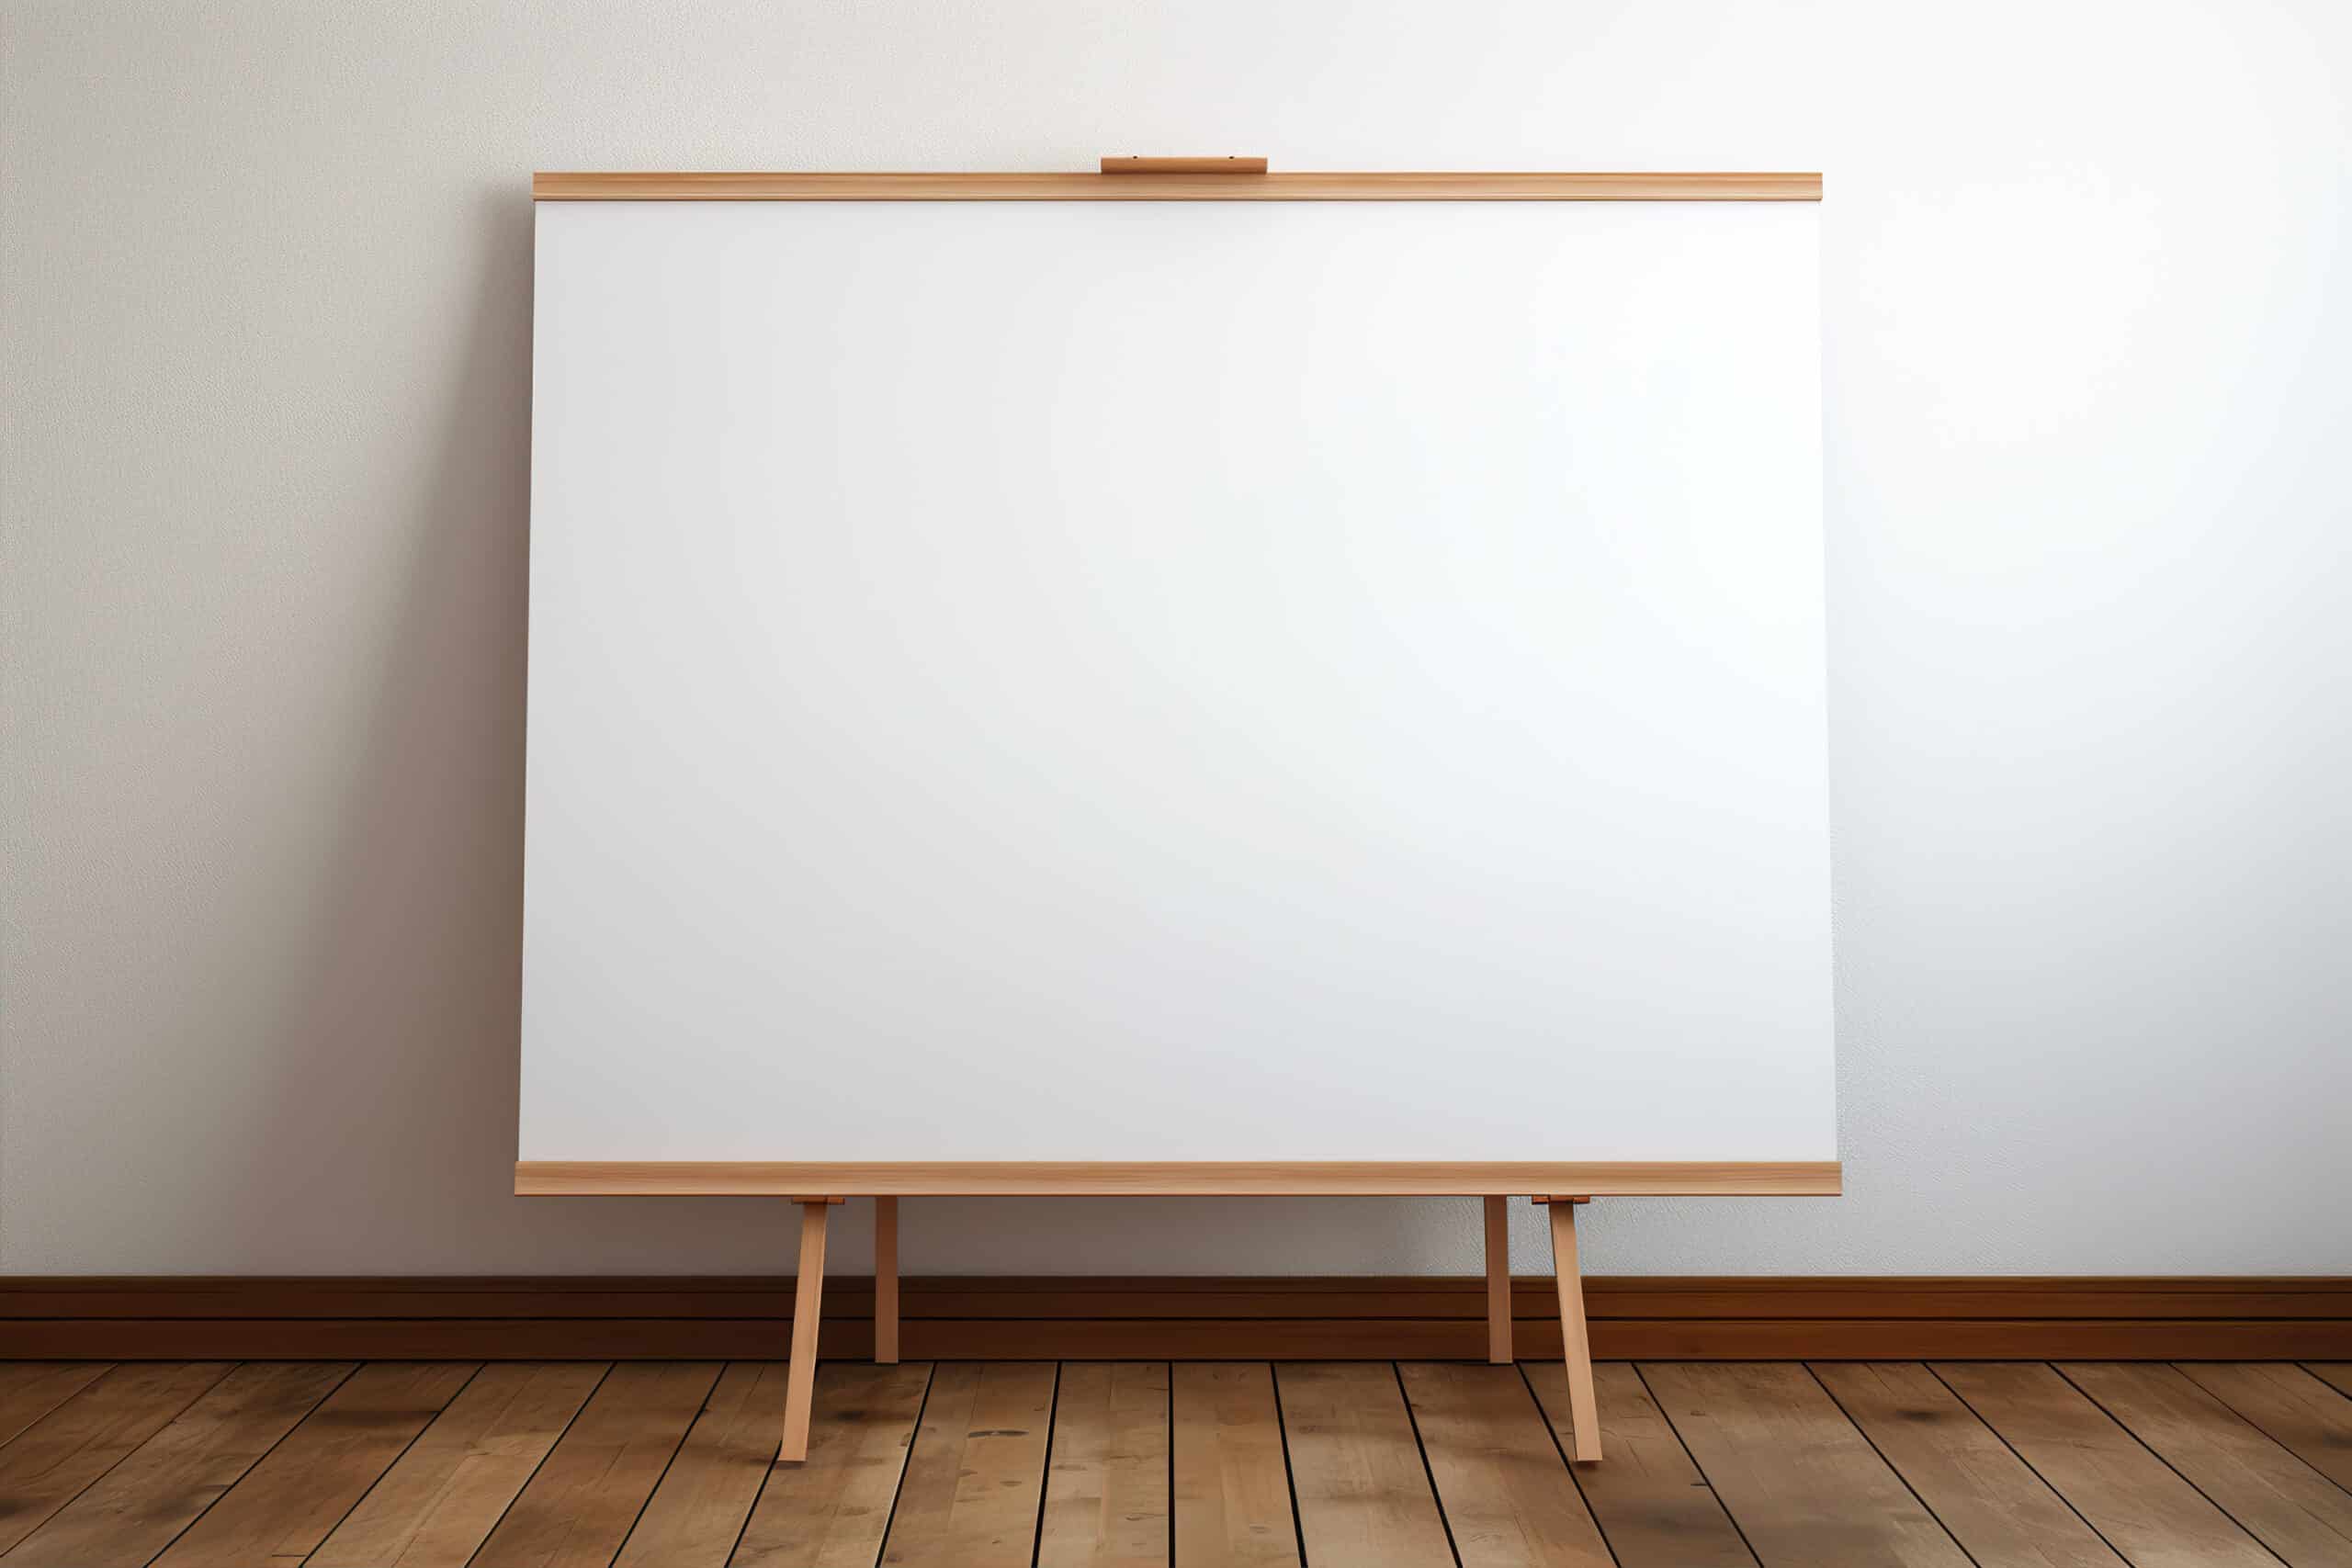 www.appr.com : How To Use A Smart Board?